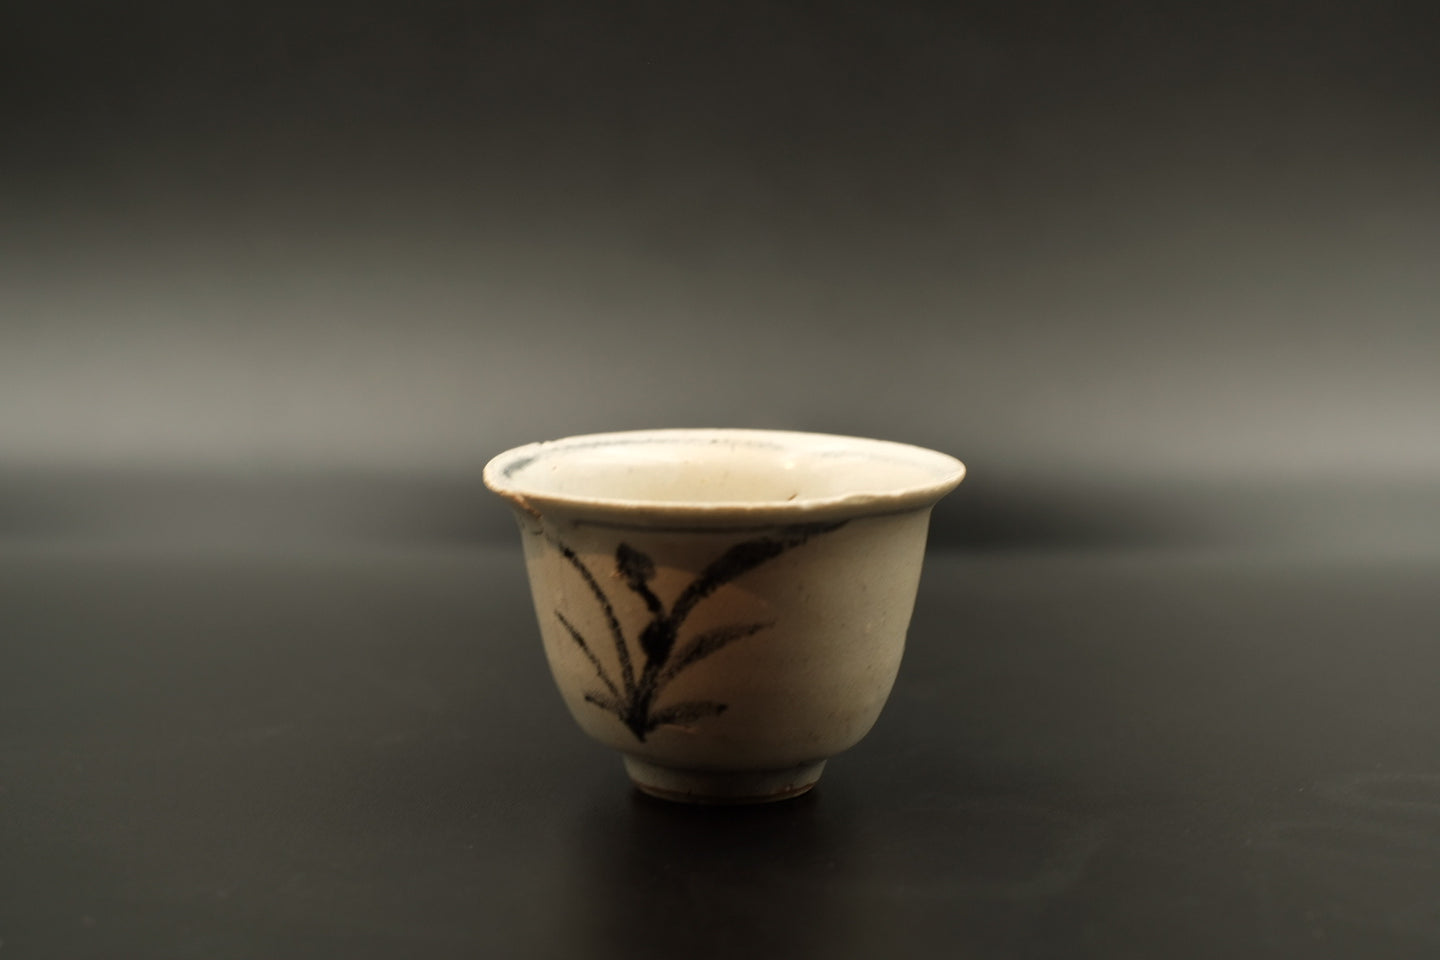 Ming Dynasty Cups